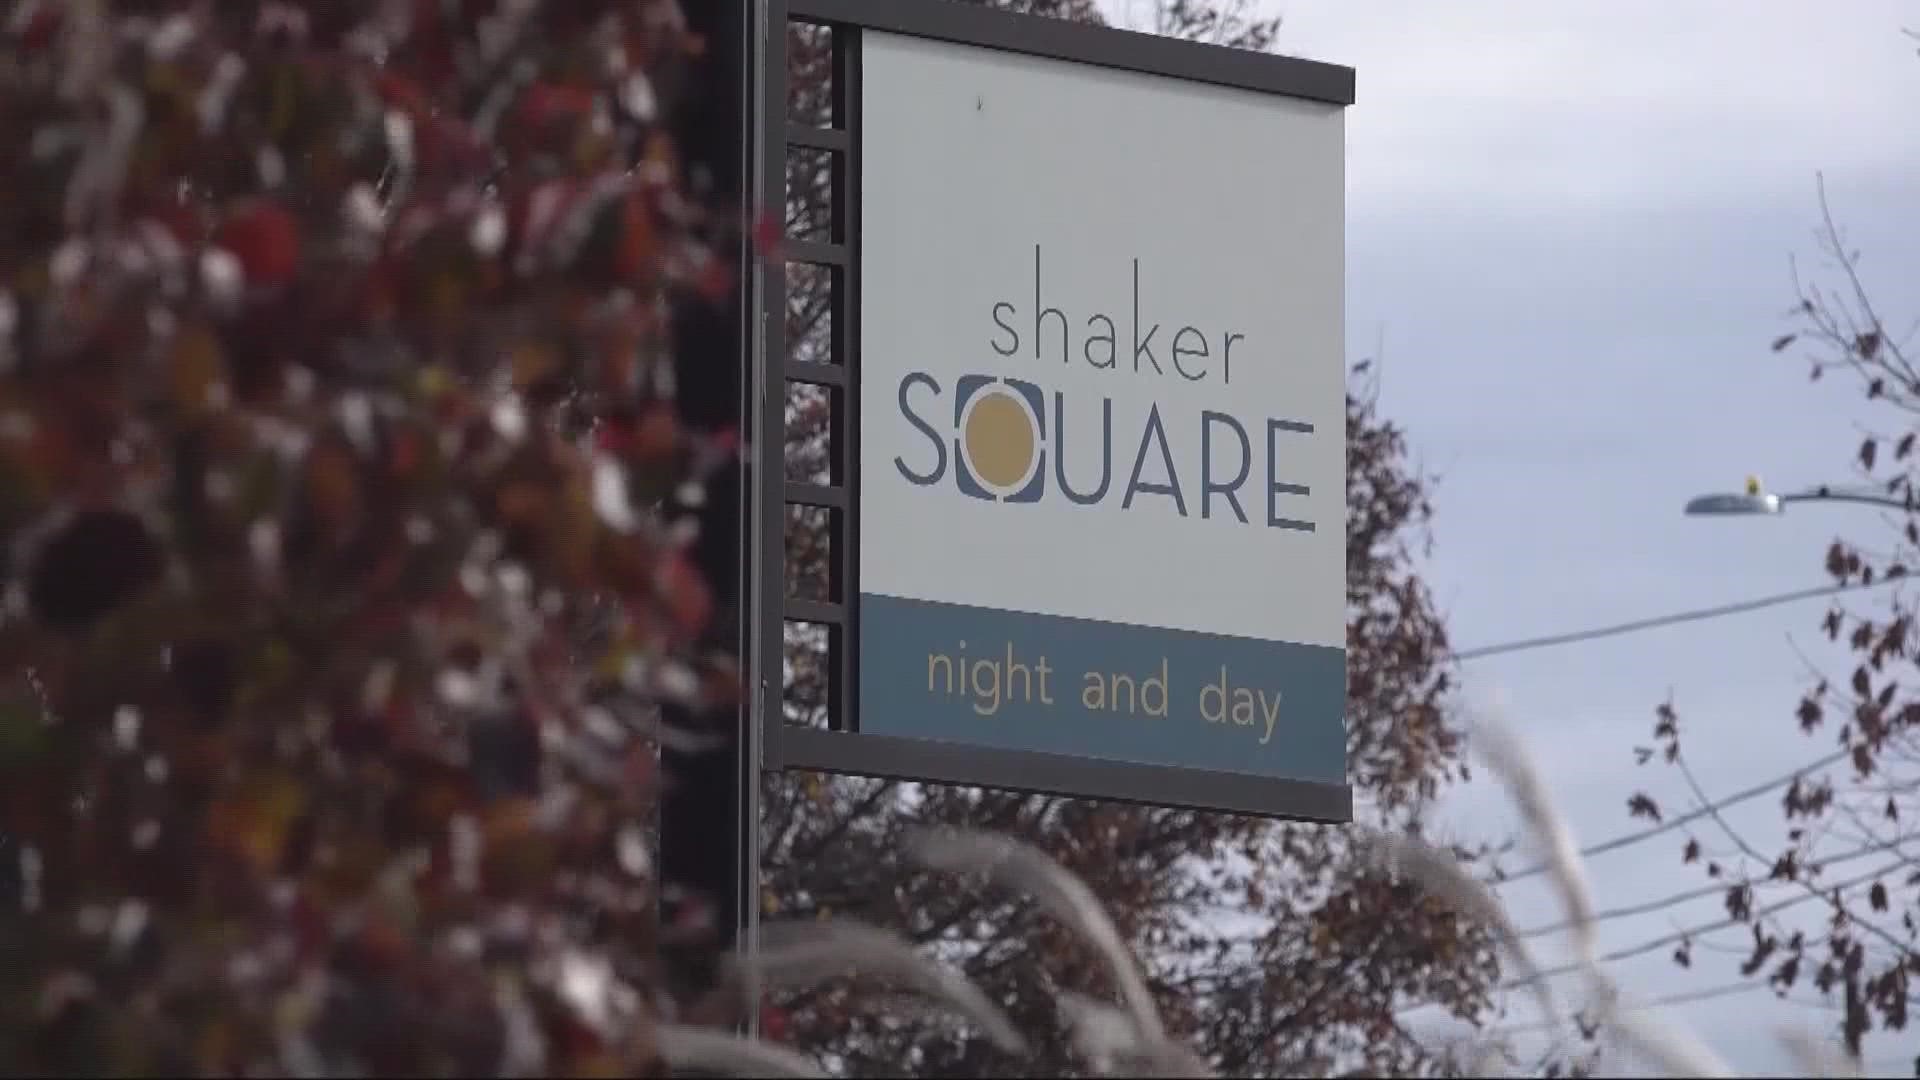 Two local non-profits agreed to an $11 million deal to purchase the historic east side retail center Shaker Square. 3News' Russ Mitchell has more on the transaction.